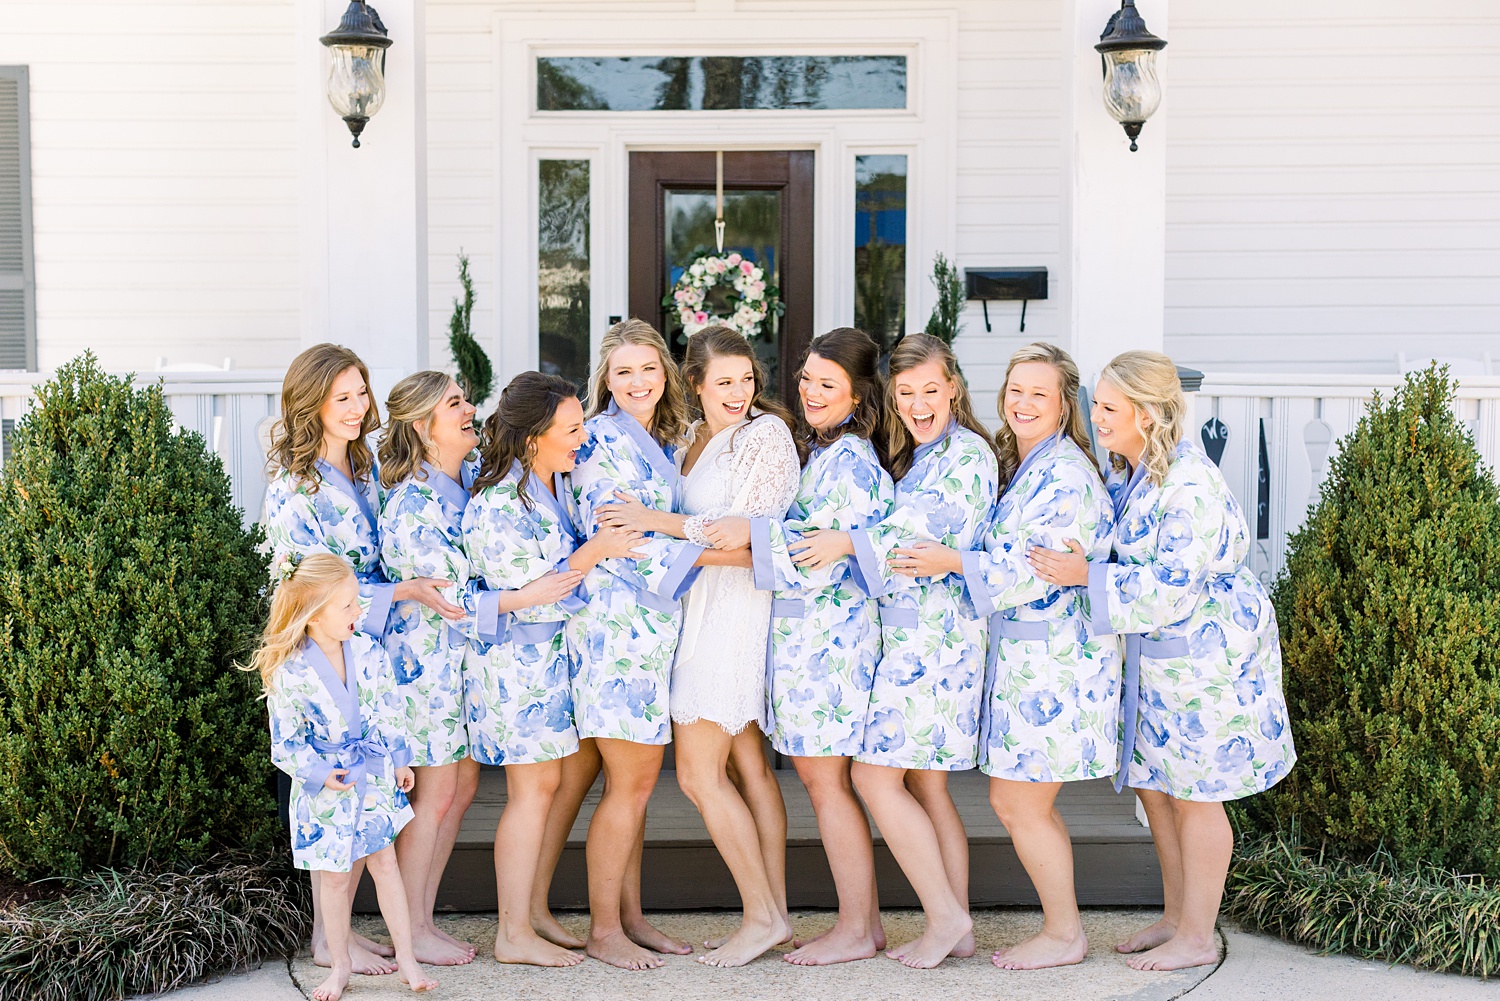 bride poses with bridesmaids in matching blue robes